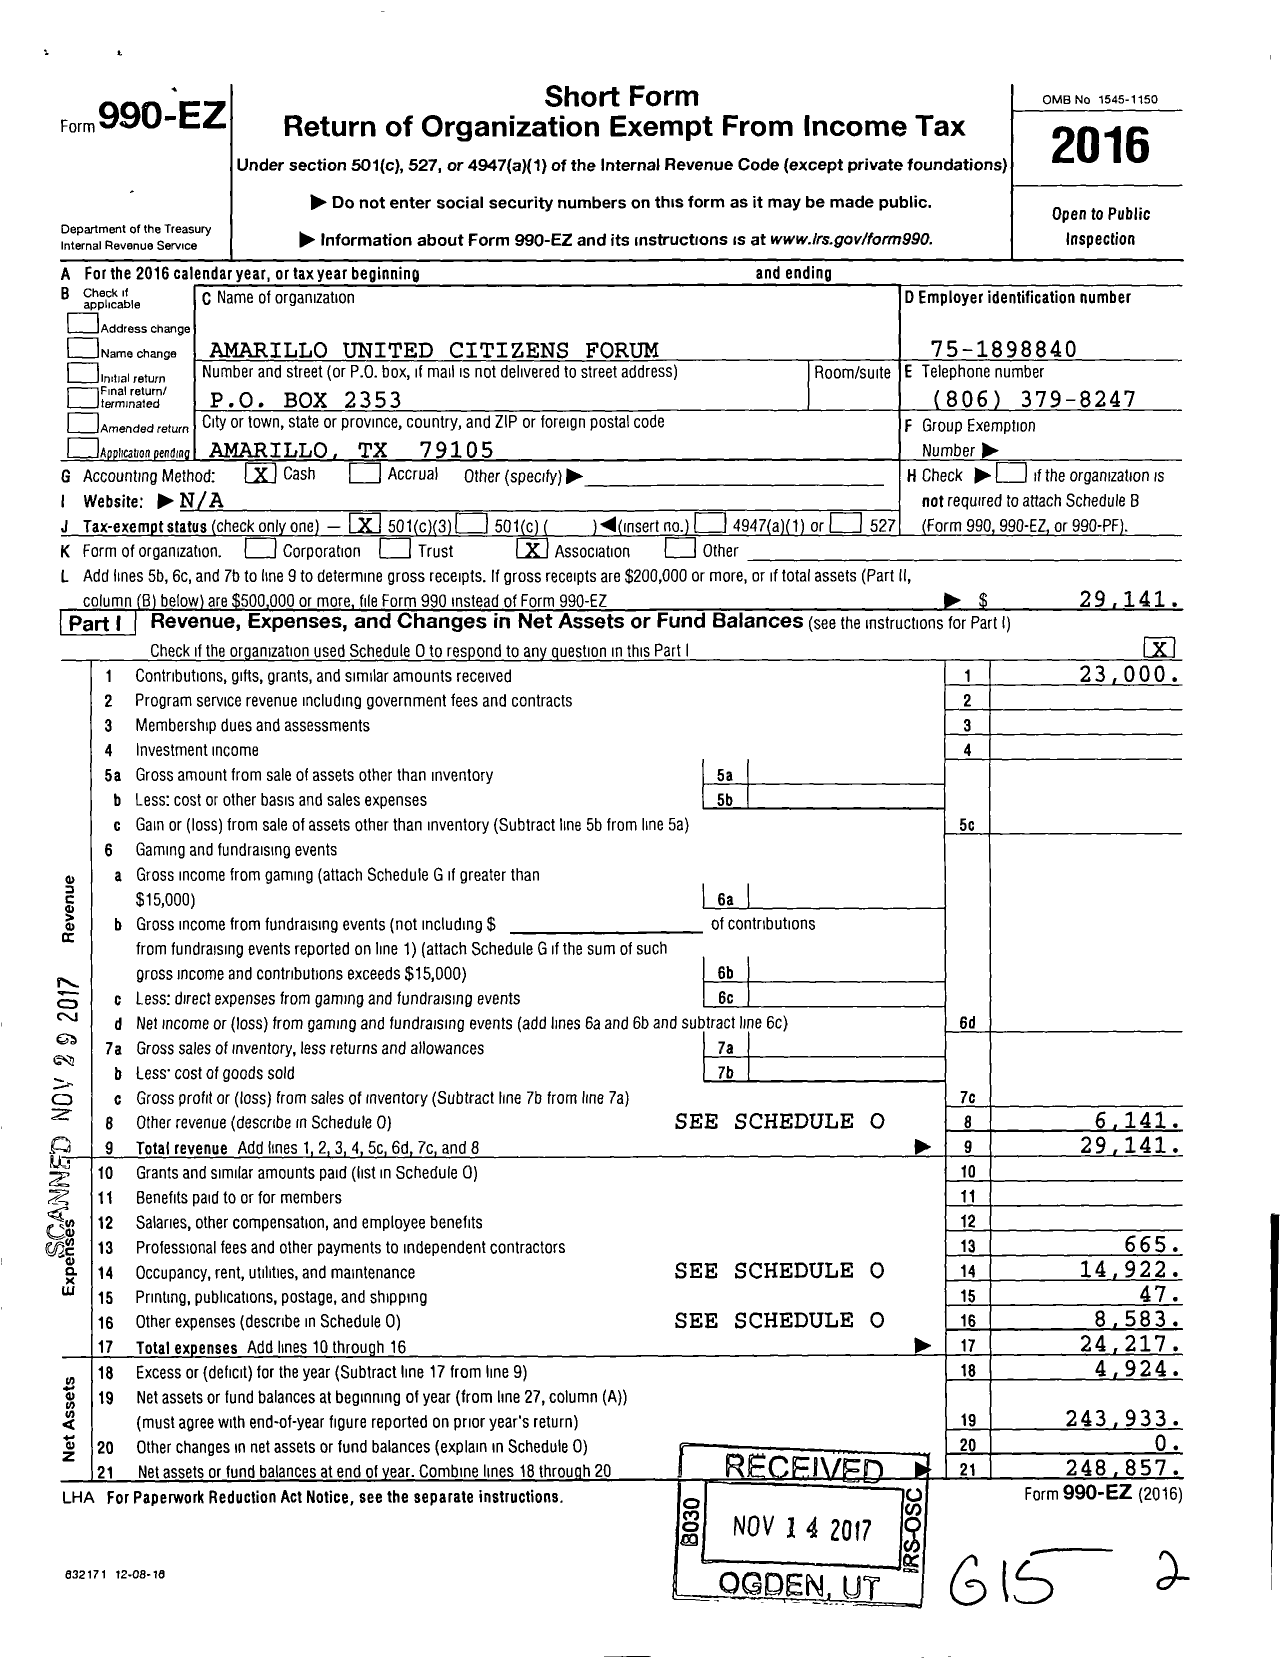 Image of first page of 2016 Form 990EZ for Amarillo United Citizens Forum